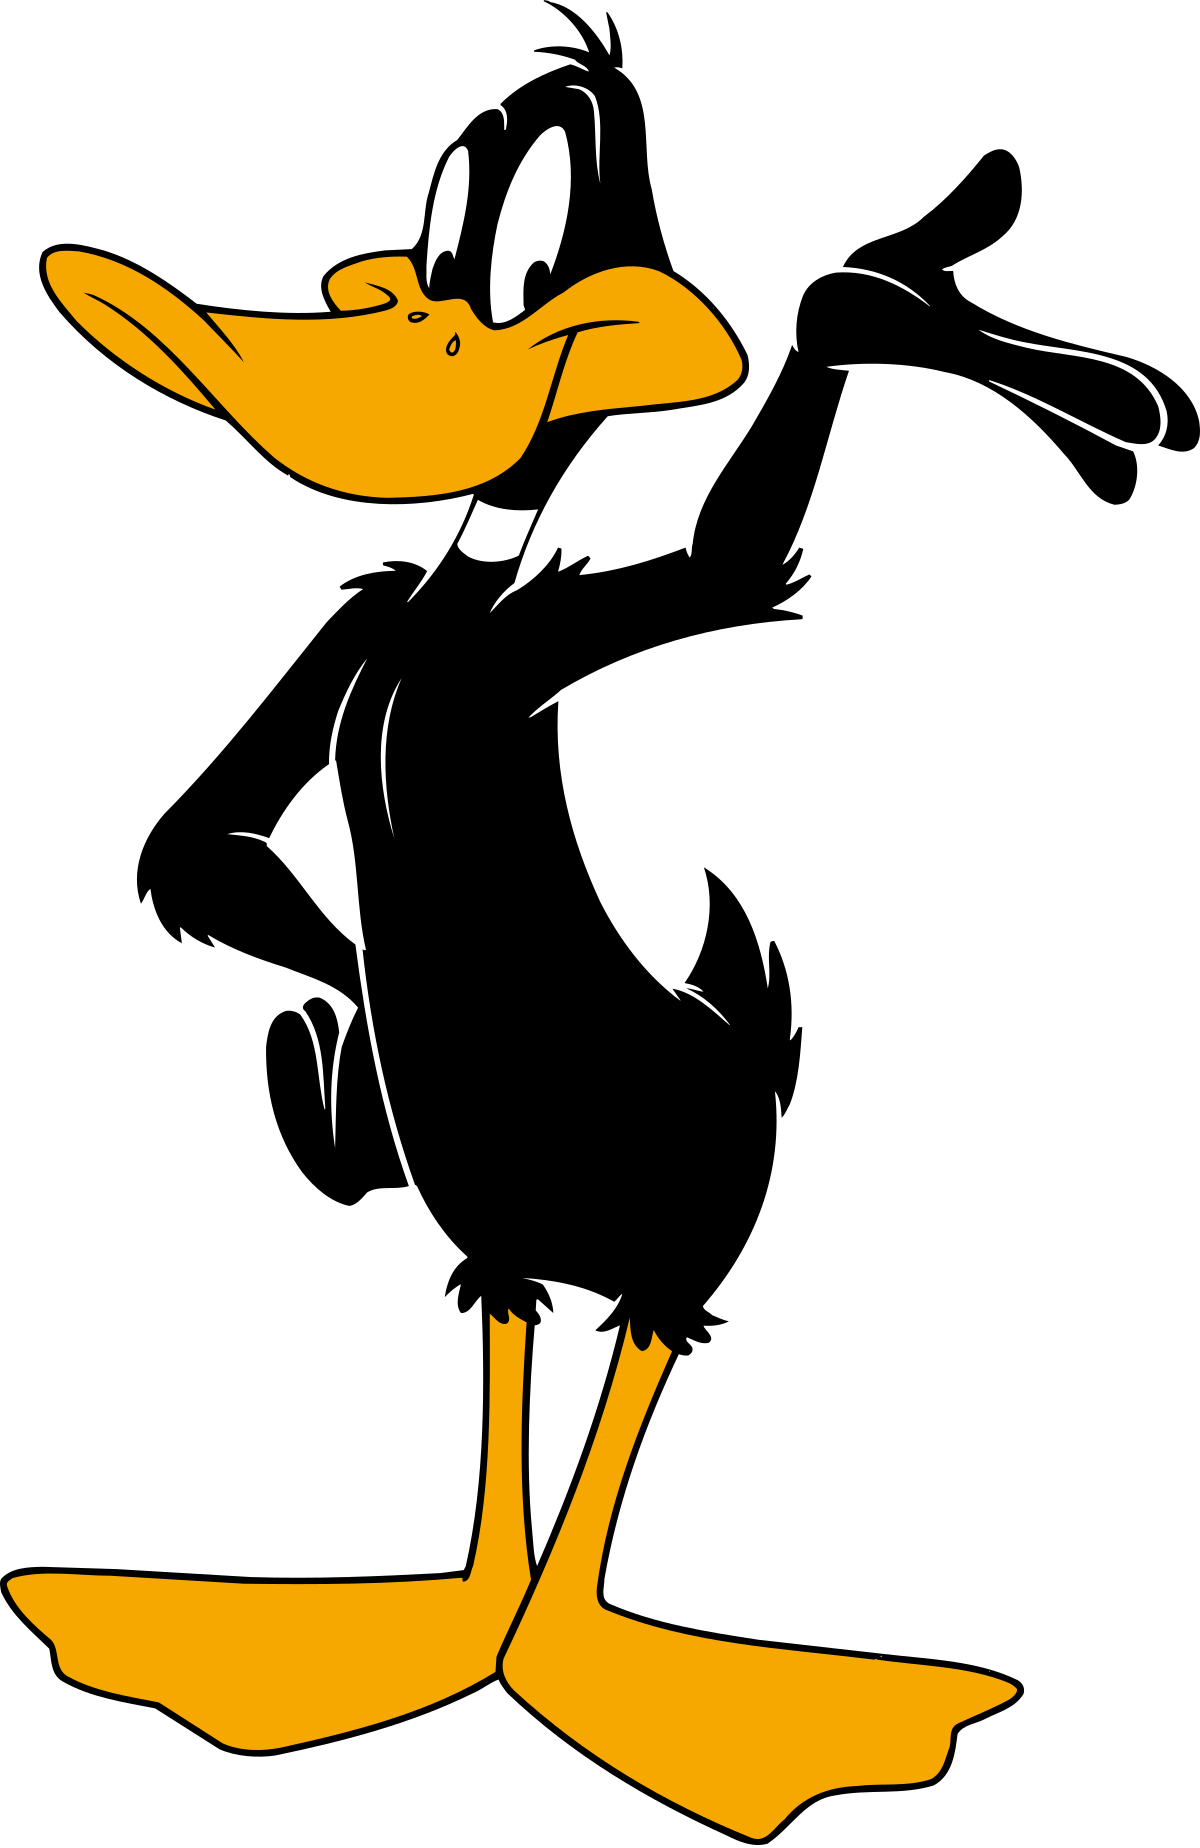 Daffy Duck PNG Image Background